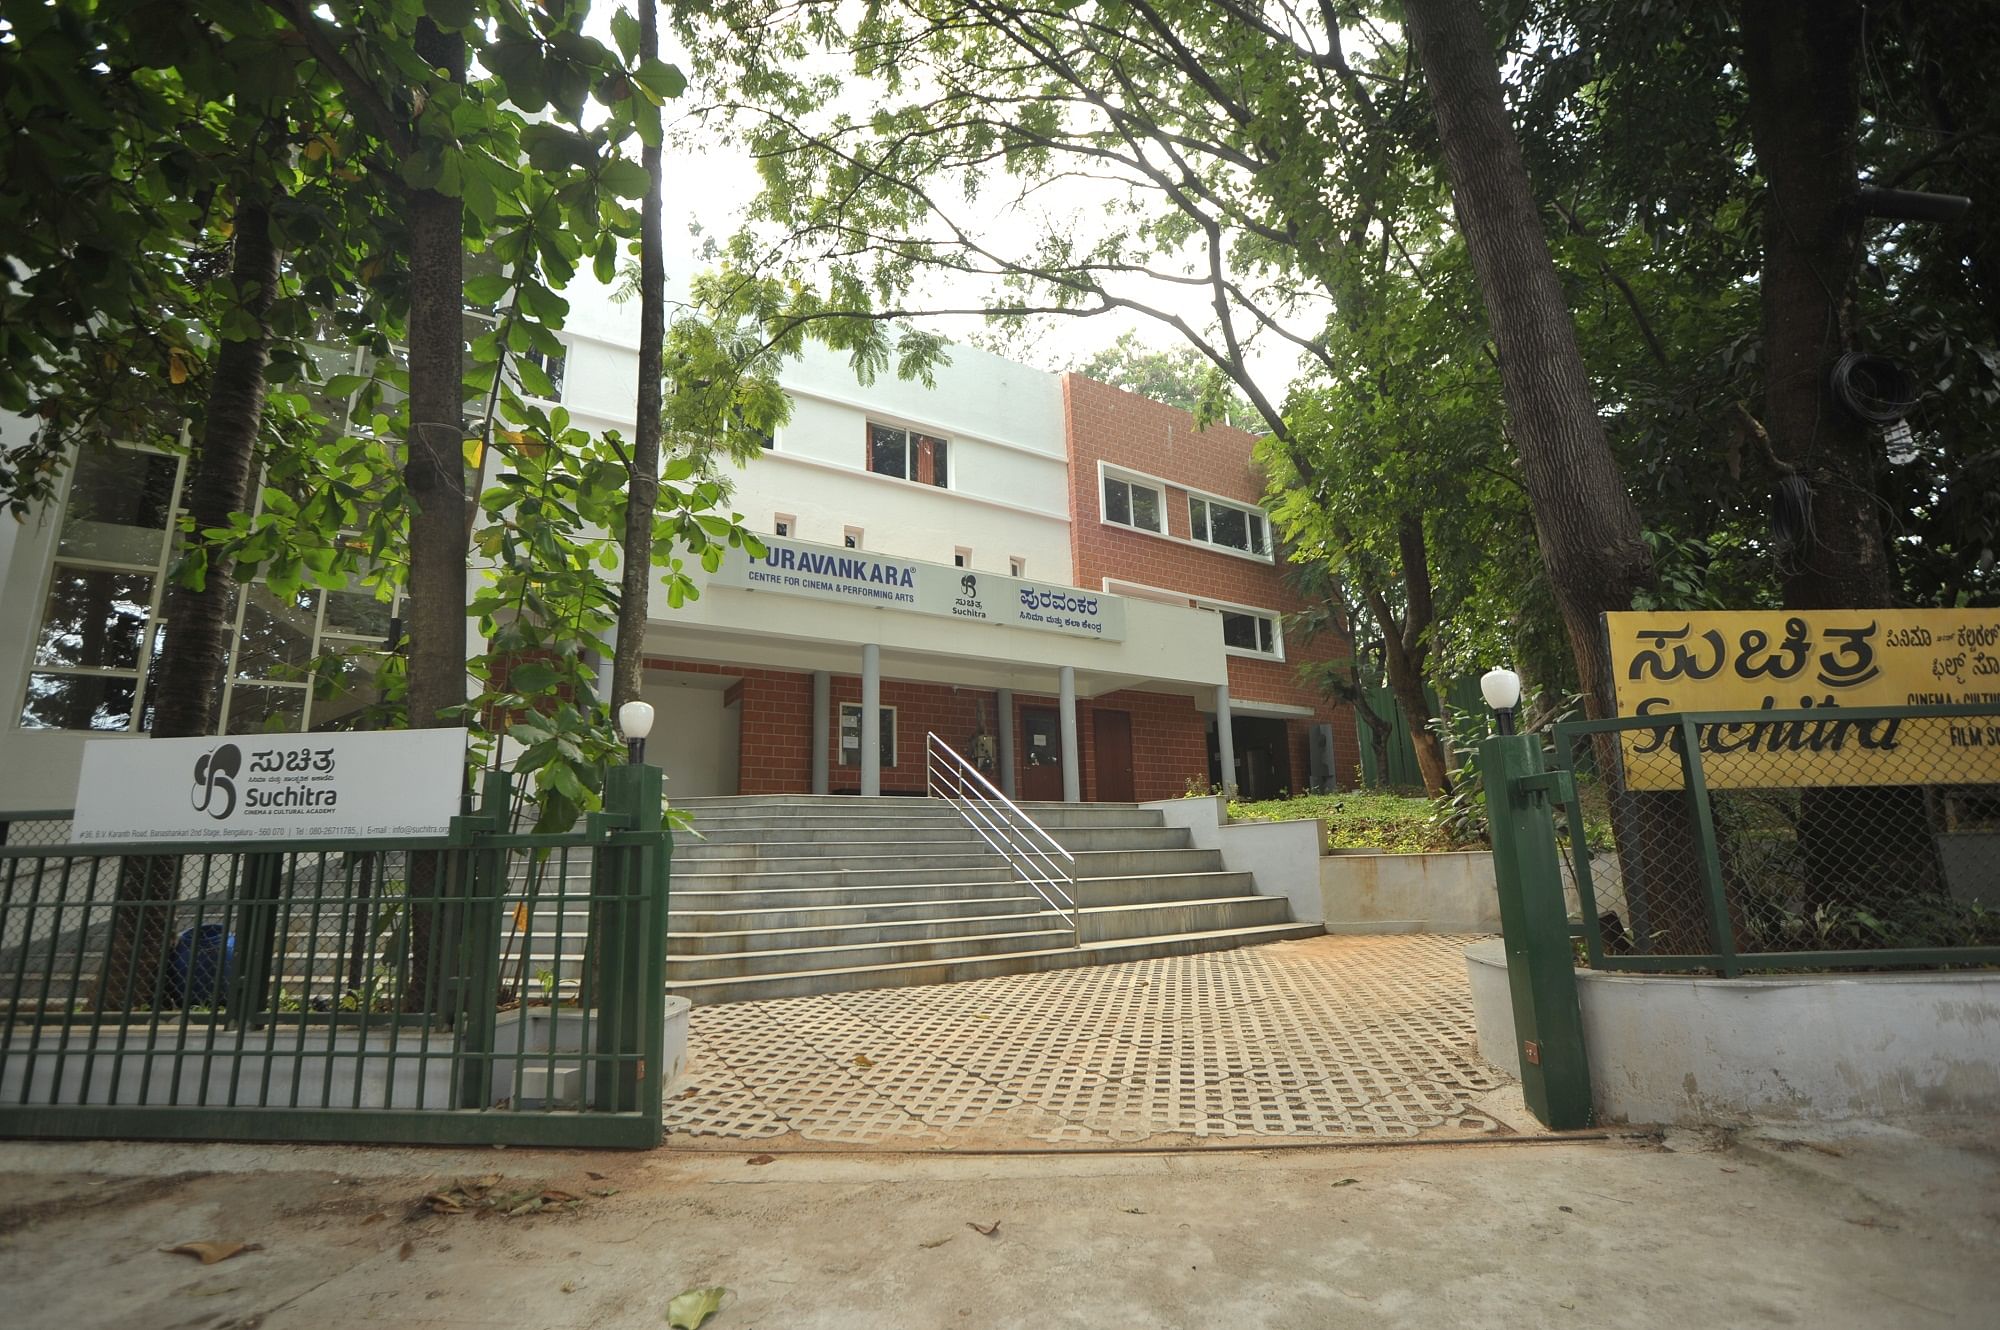 Suchitra Film Society in Banashankari is one of the better-known film societies in India.